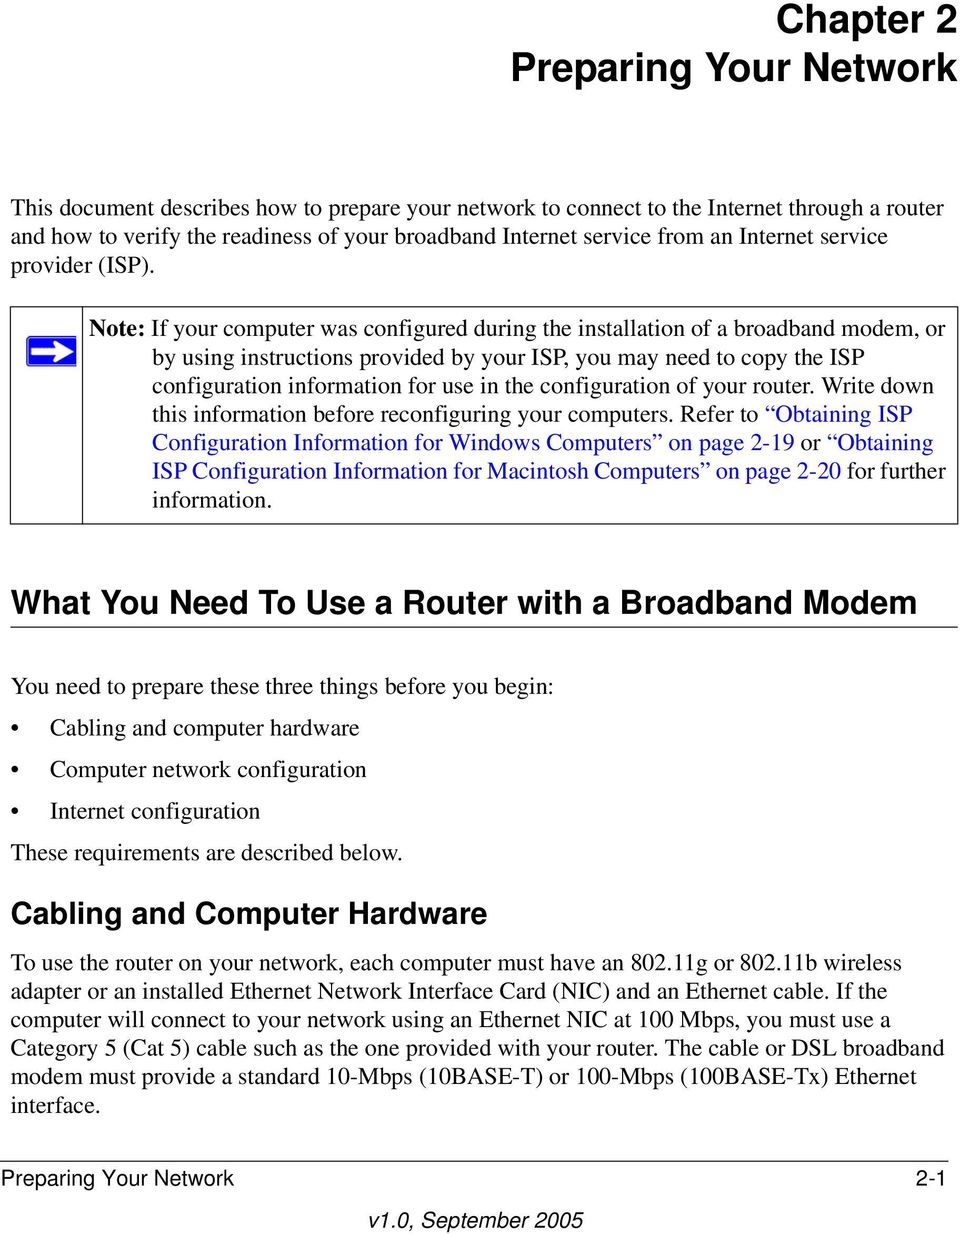 Note: If your computer was configured during the installation of a broadband modem, or by using instructions provided by your ISP, you may need to copy the ISP configuration information for use in